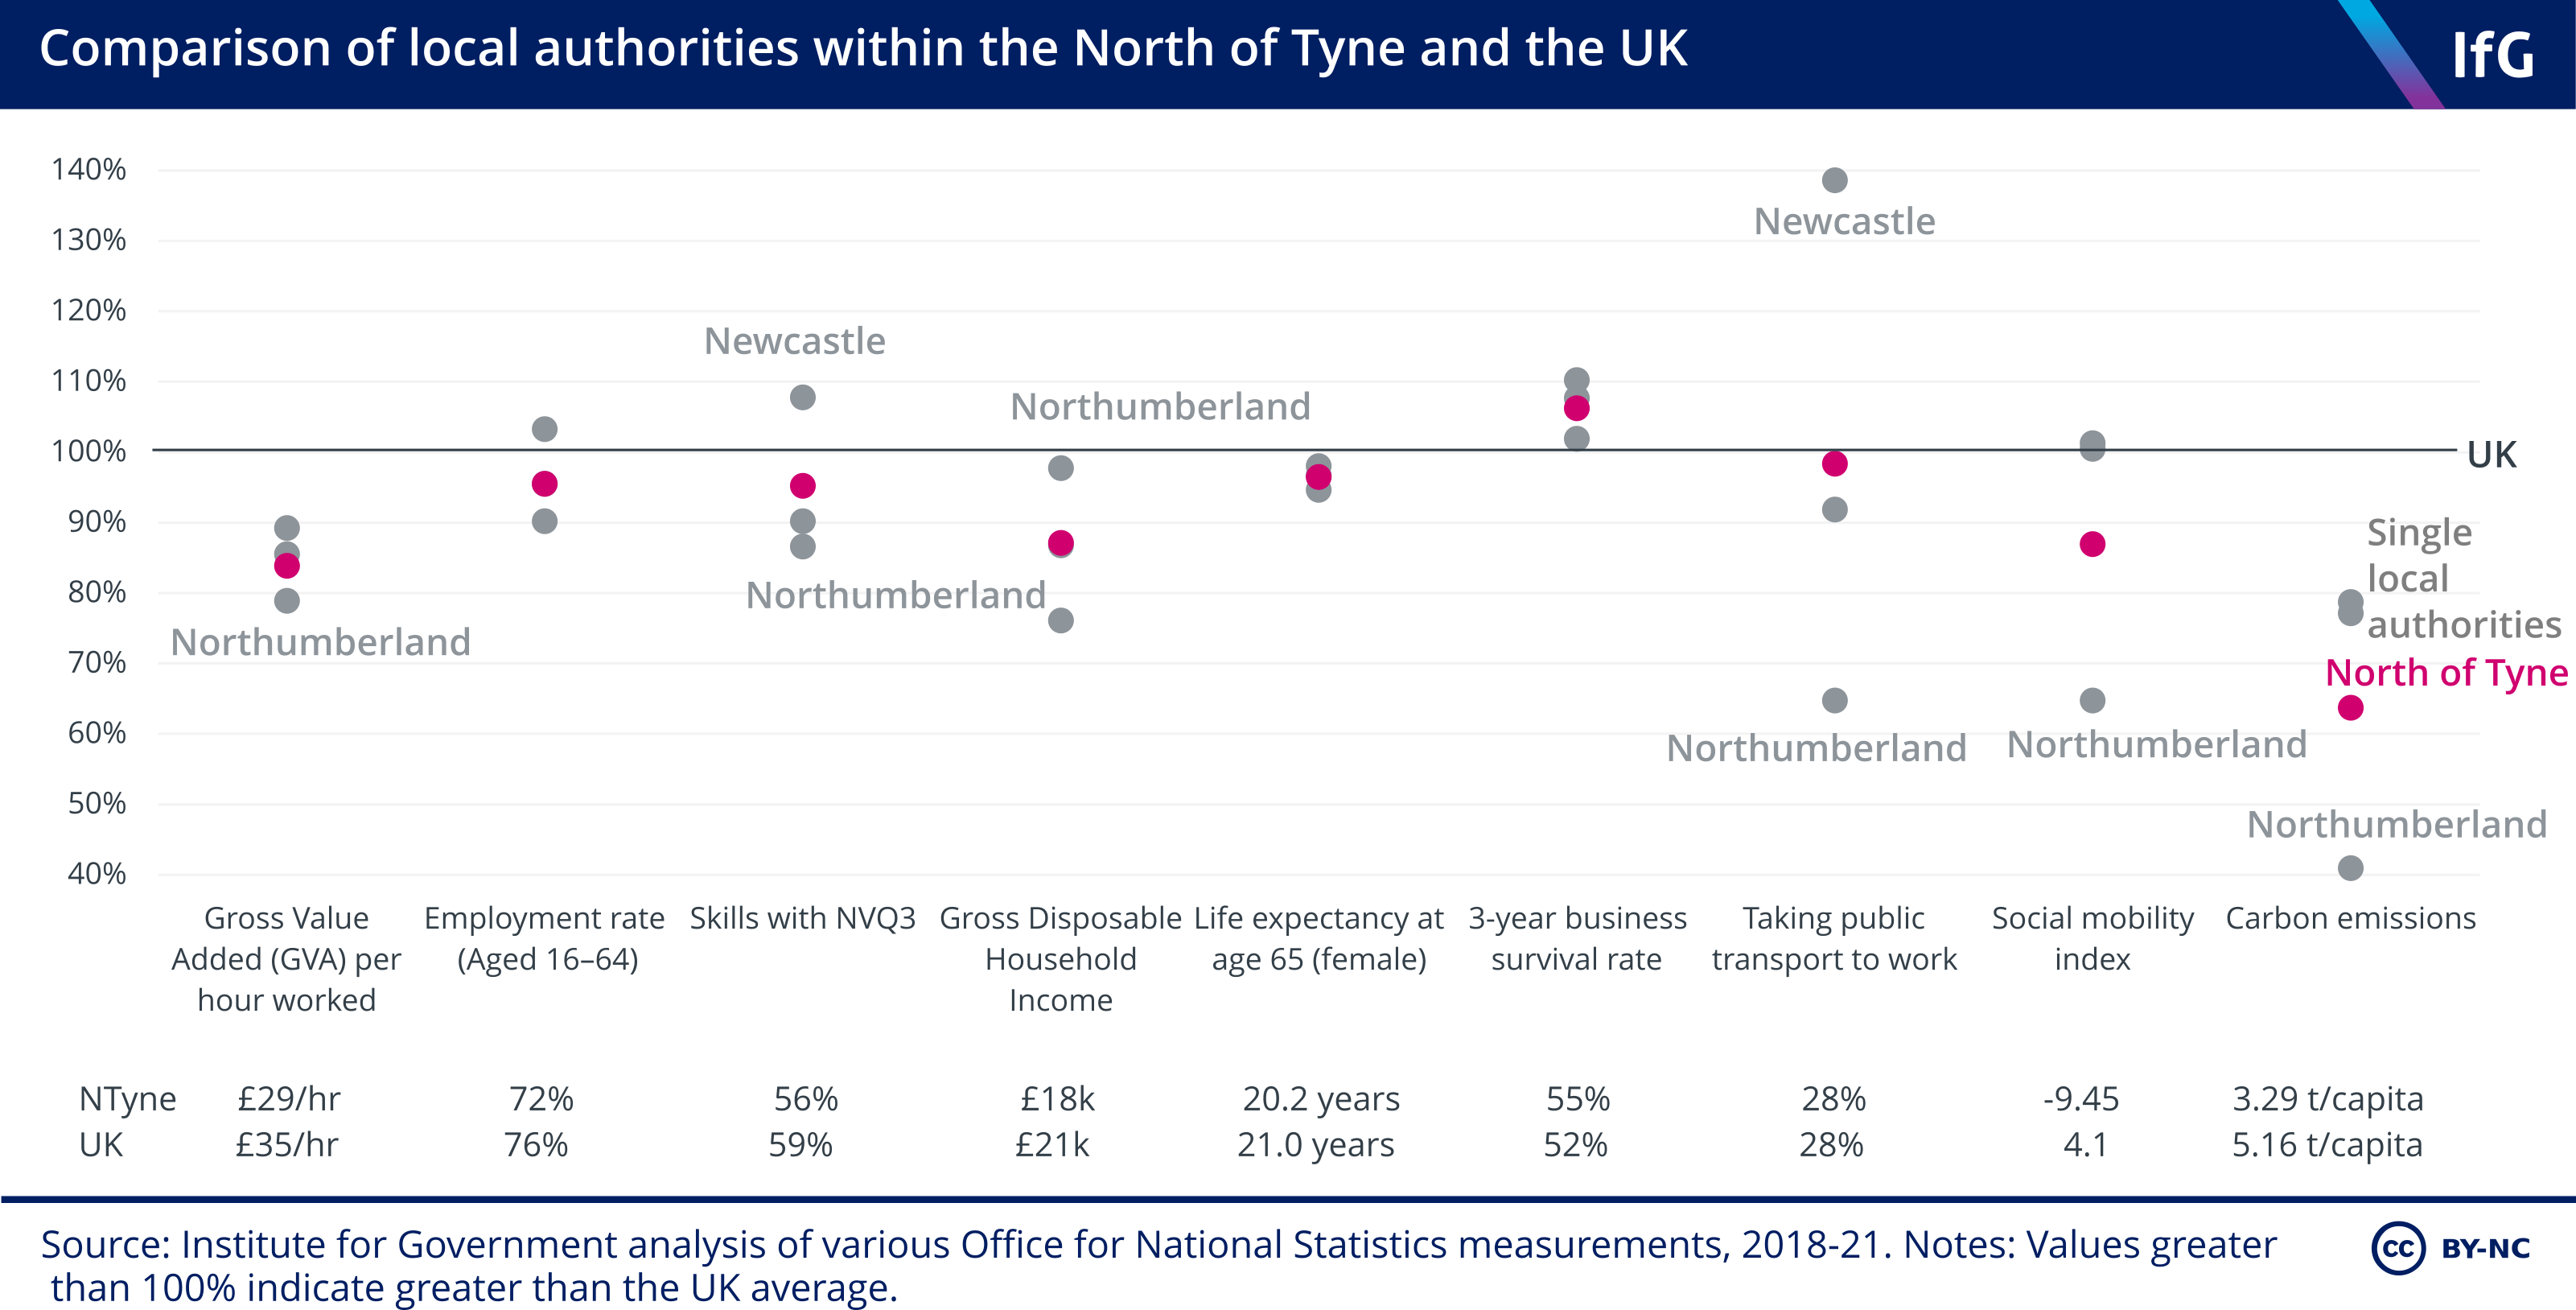 Comparison of local authorities within the North of Tyne and the UK